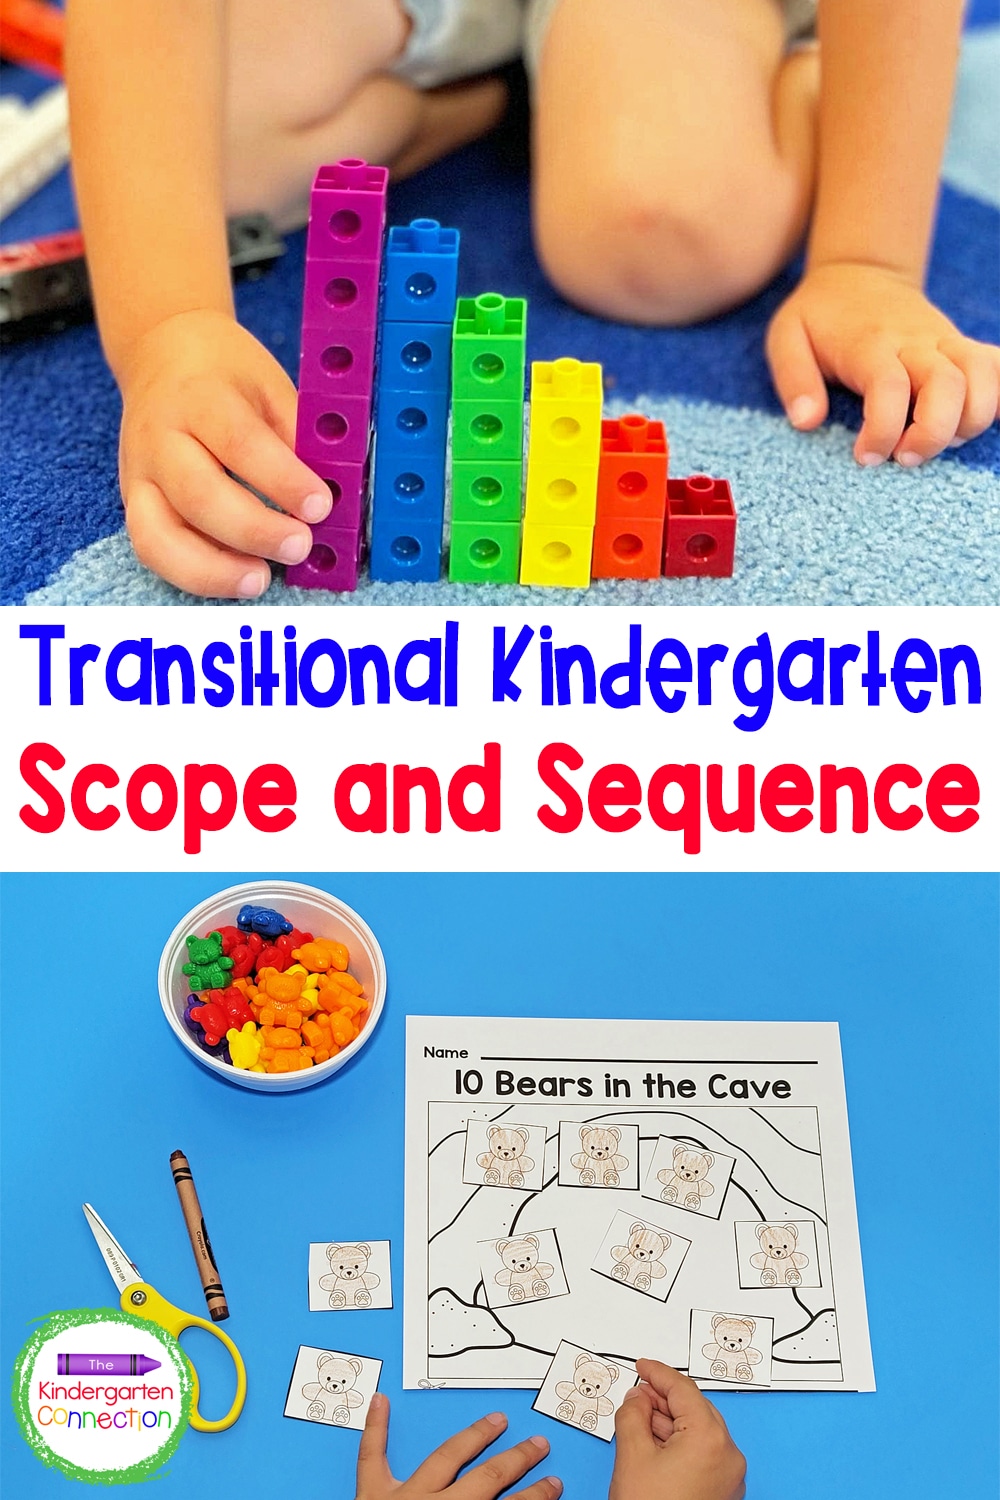 Scope and Sequence for Transitional Kindergarten Lesson Plans